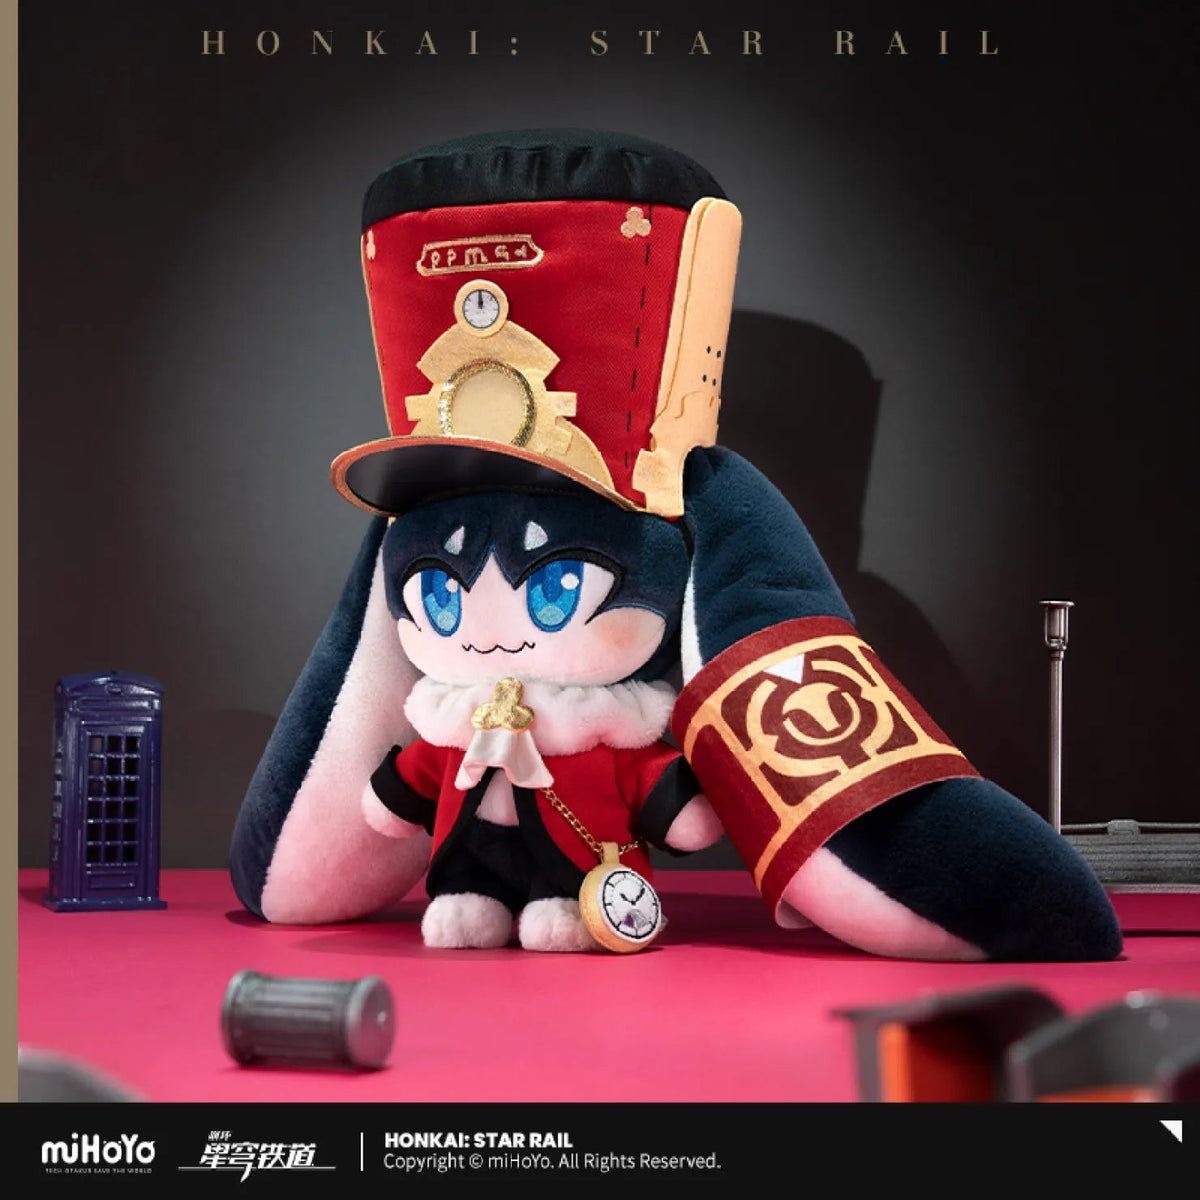 Honkai: Star Rail Pom Pom Plush Doll (Without Outfit Clothe)-miHoYo-Ace Cards &amp; Collectibles